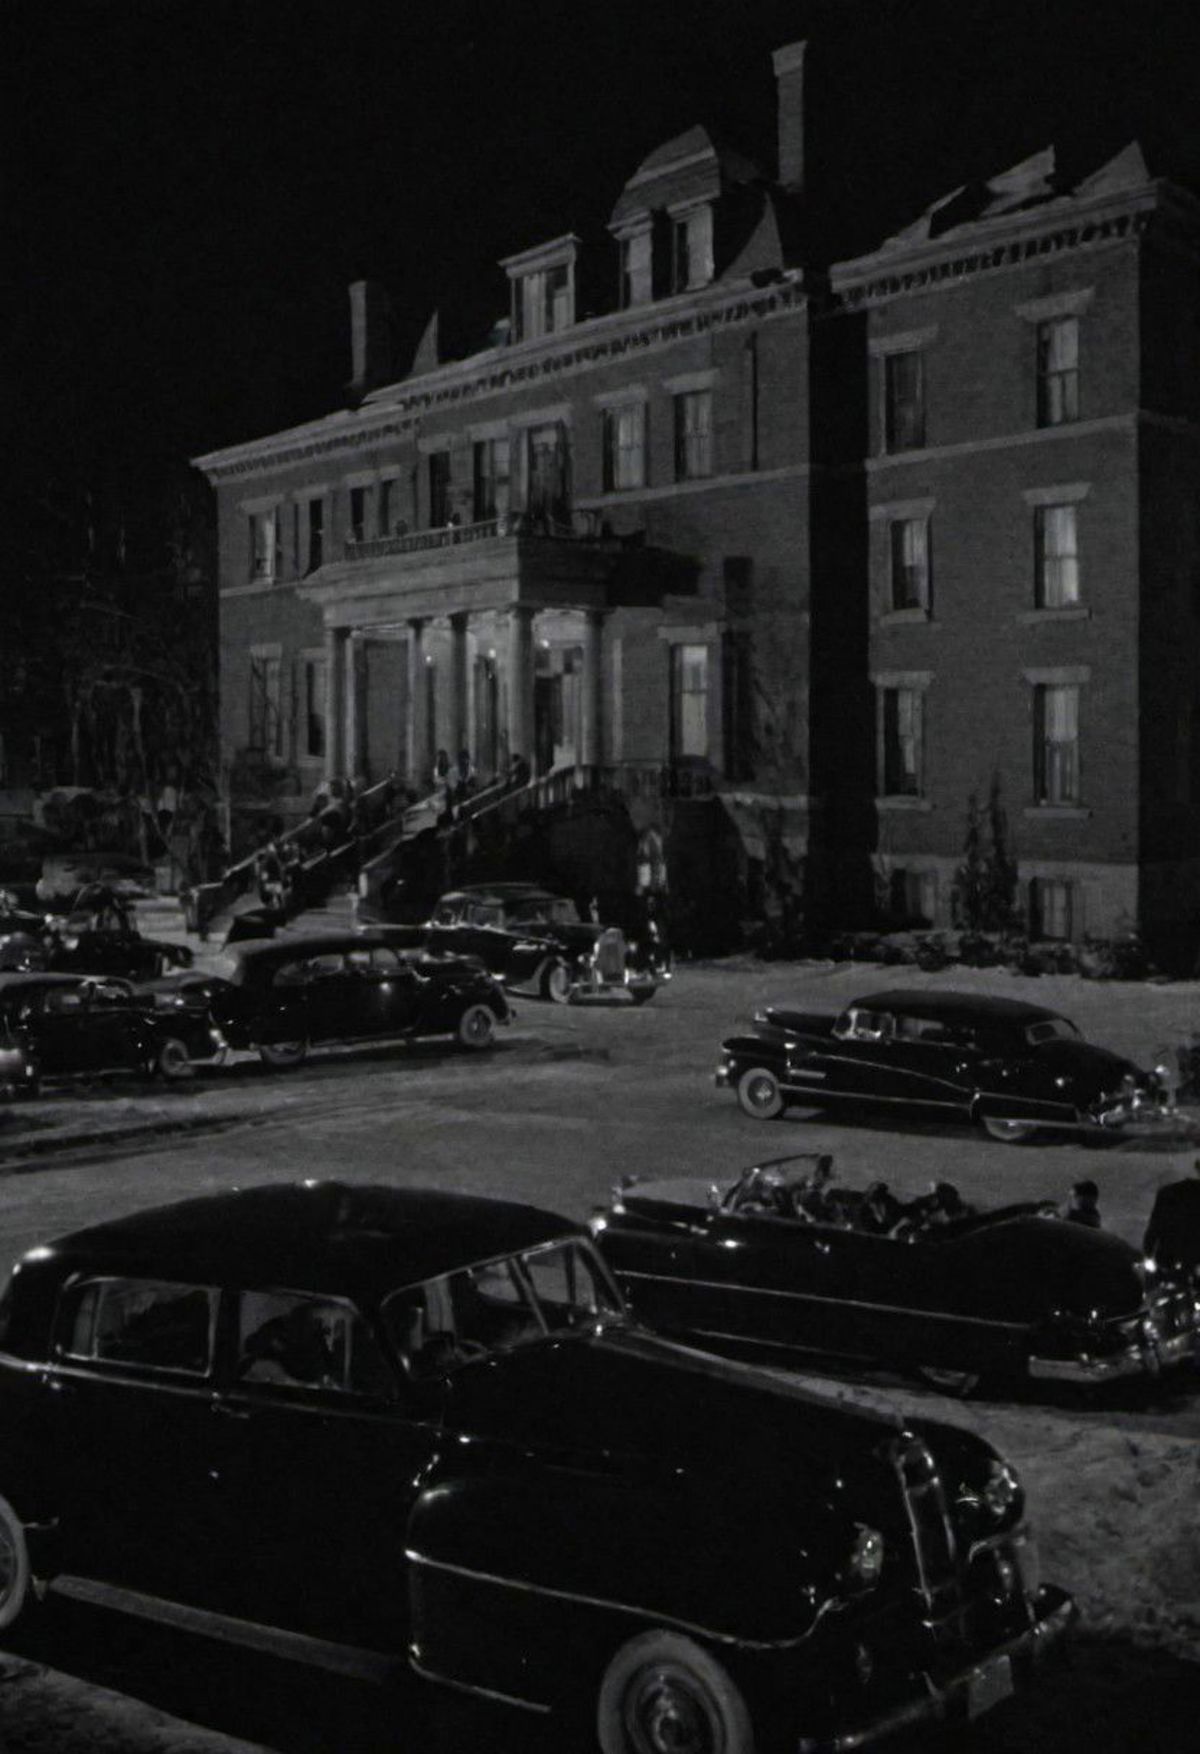 Vintage Black and White Photo of Classic Cars Parked in Front of a Large Building at Night